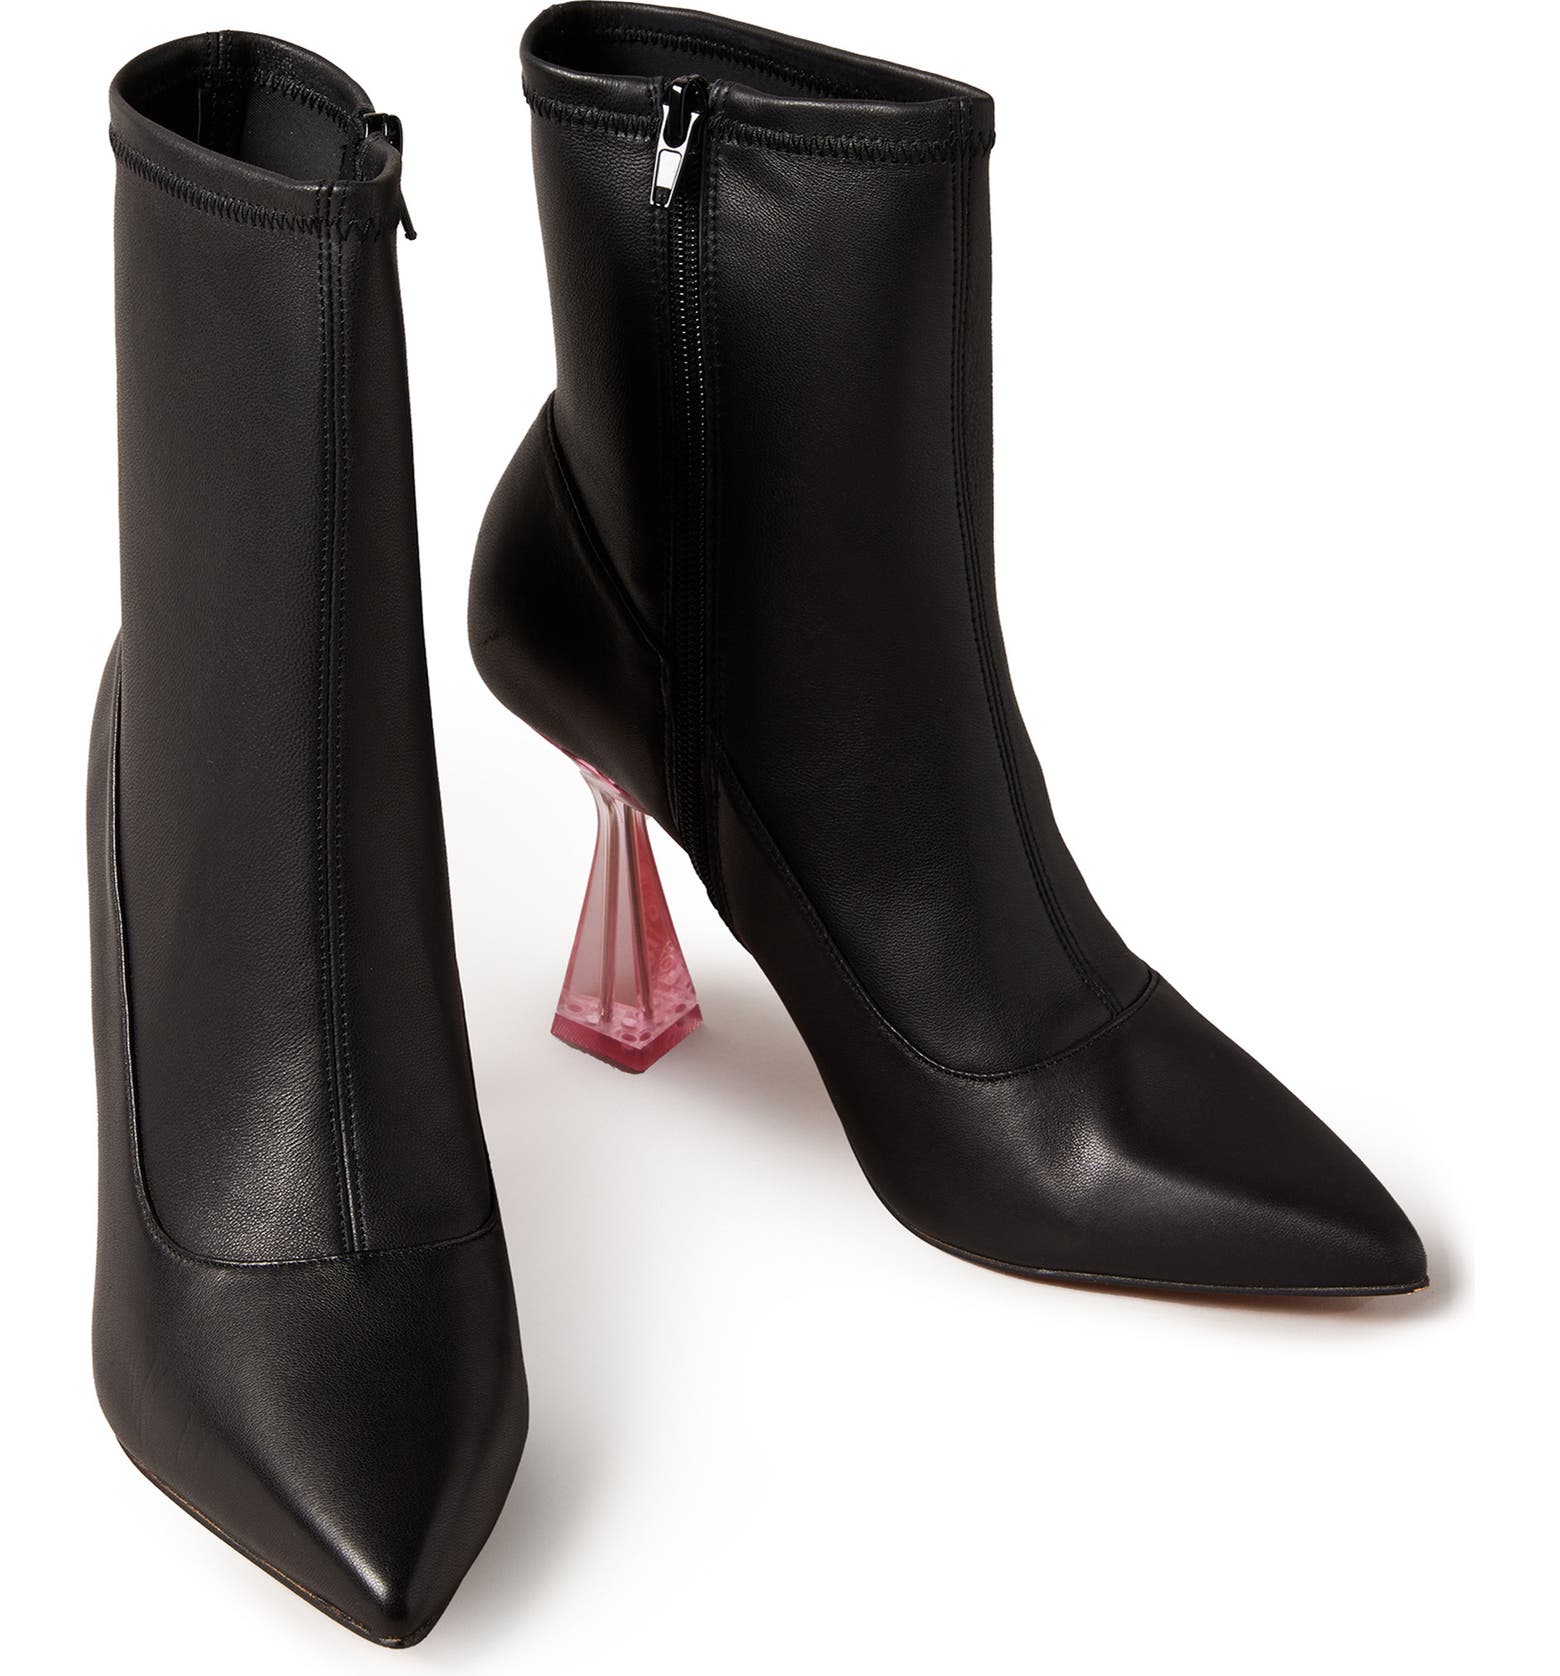 Black Ted Baker ankle boots